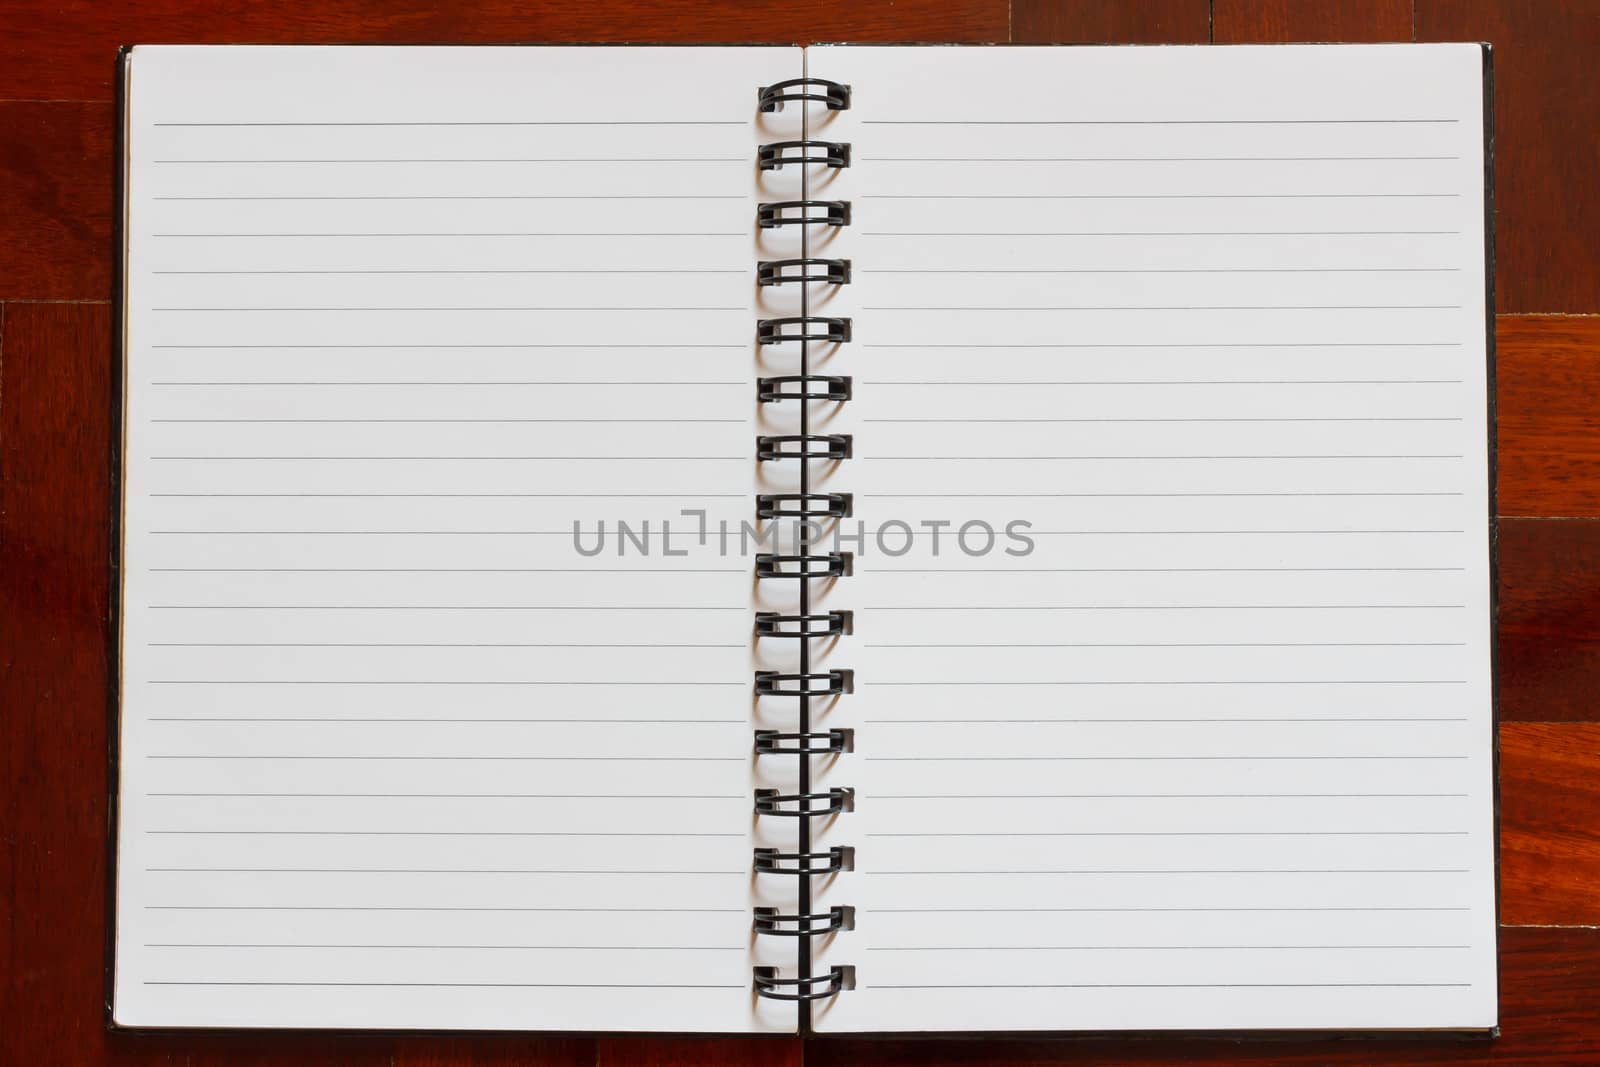 Notebook blank white page. Wooden floor in the background.